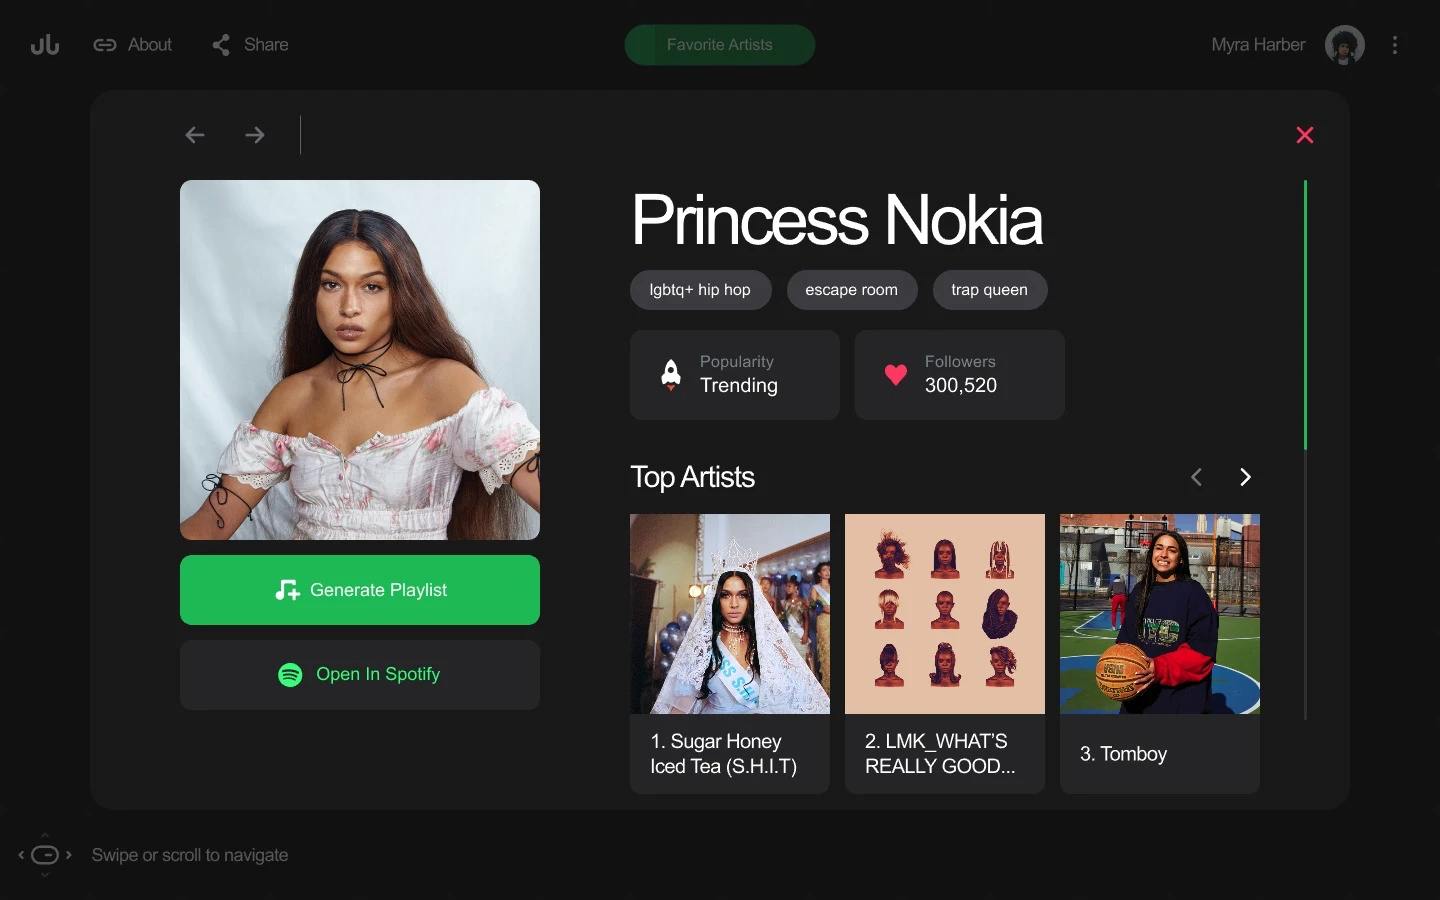 Cruuunchify for InVision Studio - Cruuunchify is a new way to discover how you listen to music, built on Spotify's public API for Spotify users. The design for this project was made entirely in InVision Studio. Feel free to download, remix and re-use.